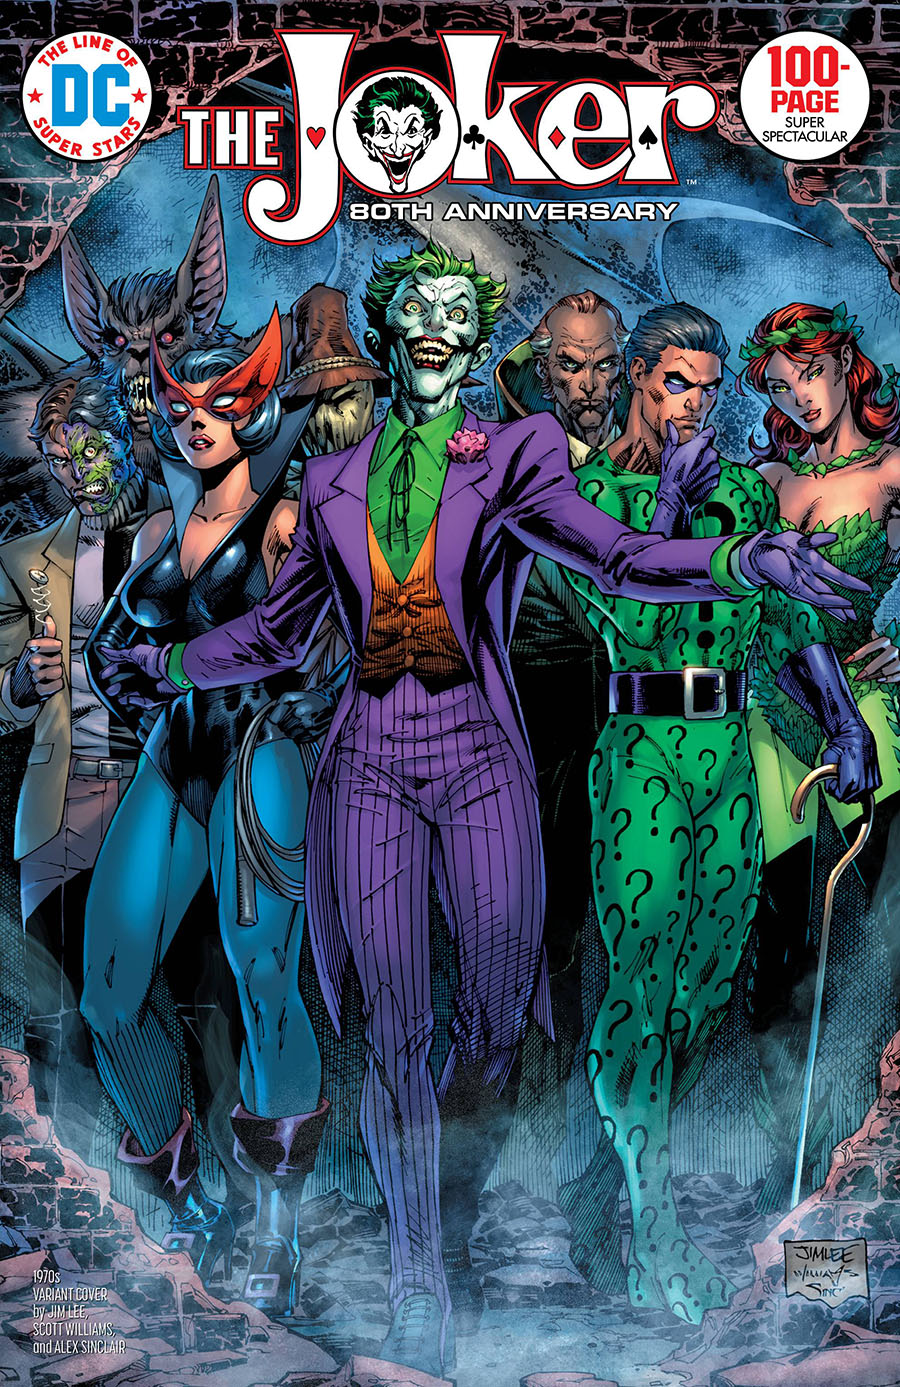 Joker 80th Anniversary 100-Page Super Spectacular #1 Cover E Variant Jim Lee & Scott Williams 1970s Cover